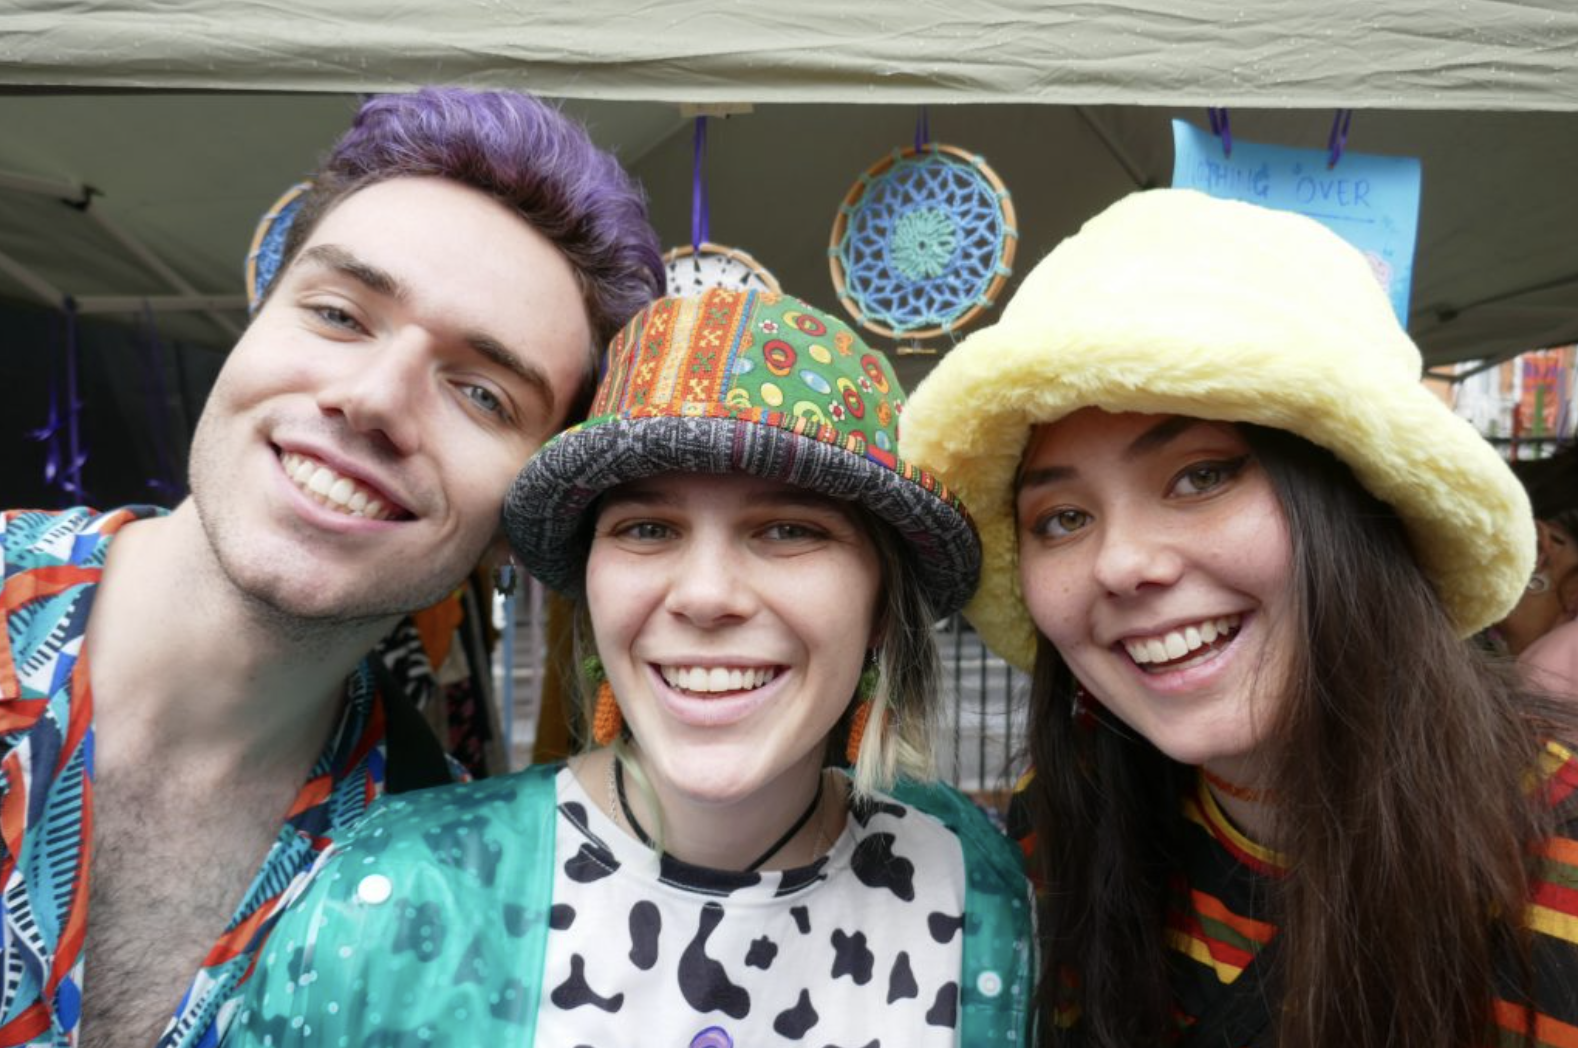 3 people at a market stall